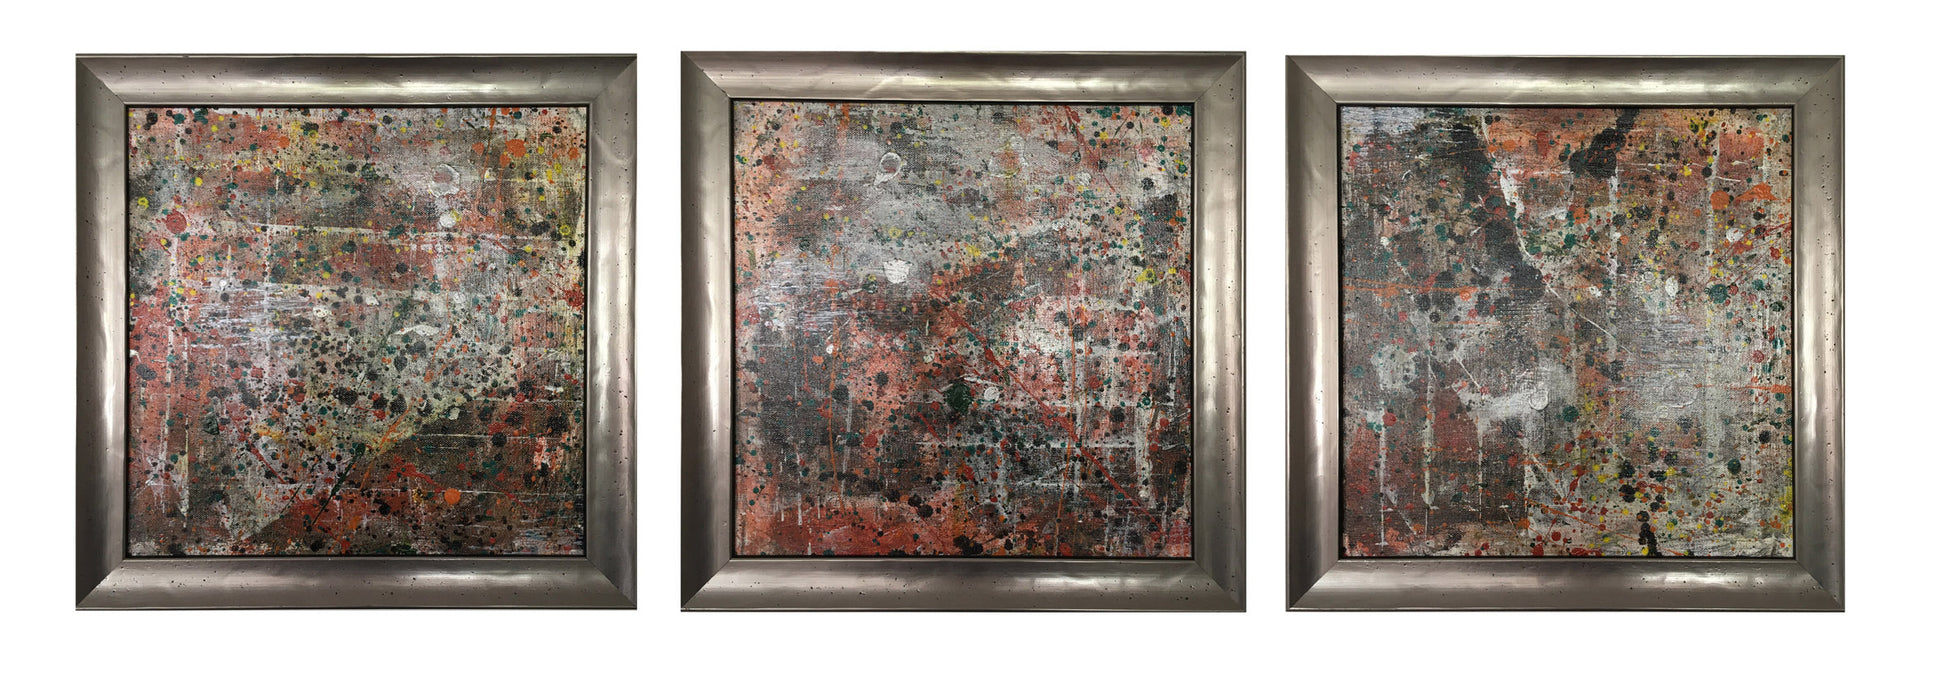 Gee-Kay-New-Beginnings-Triptych